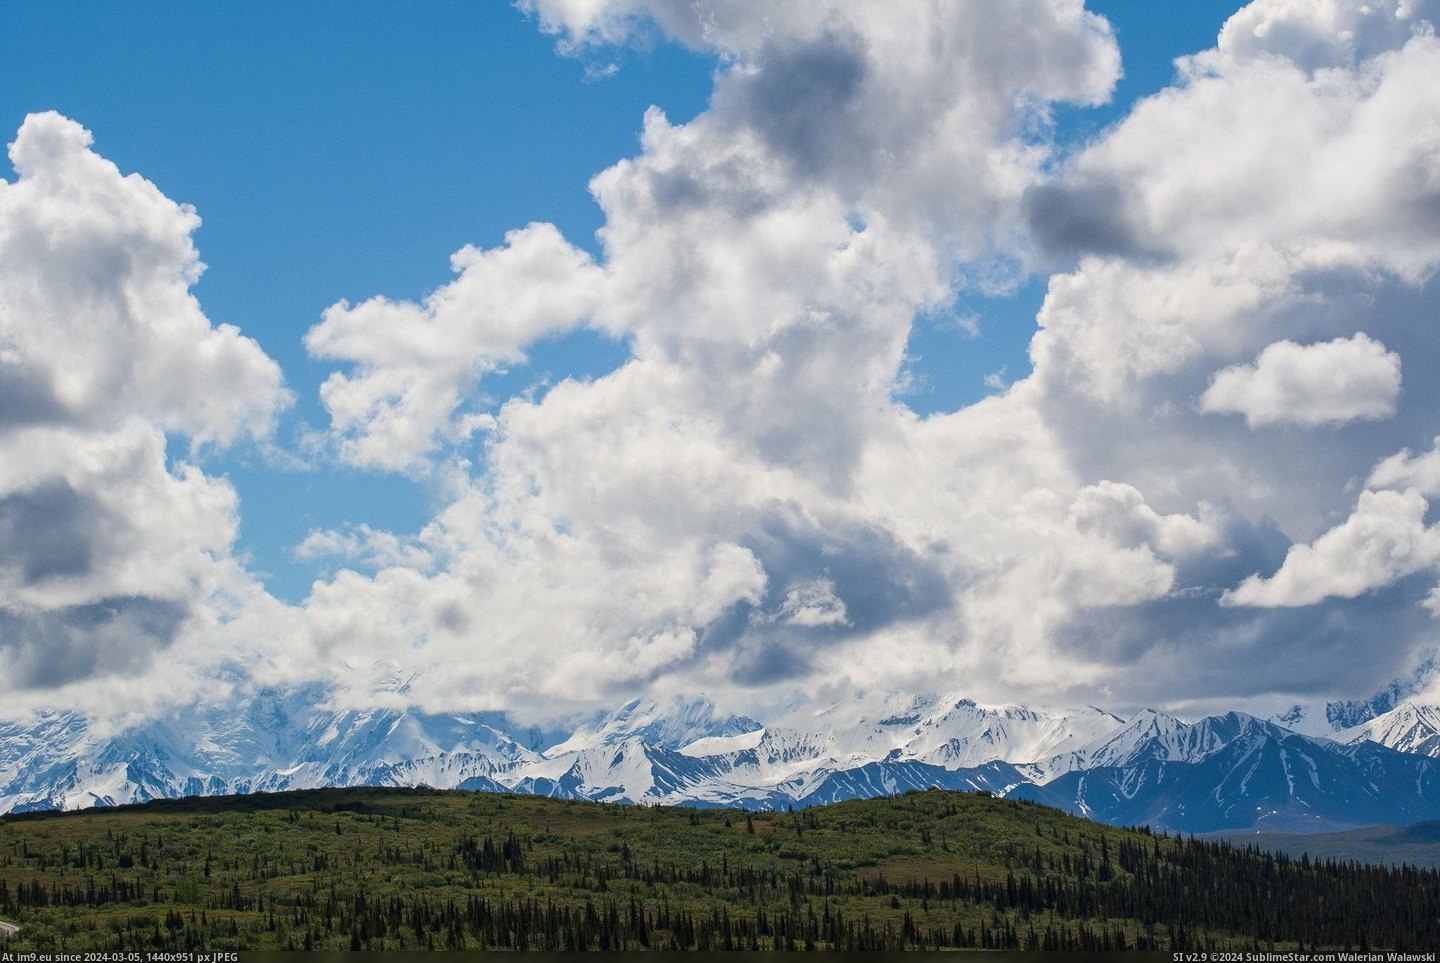 #Alaska #Range #Clouds [Earthporn] The Alaska Range near Mt. McKinley with Towering Clouds [2048x1635] Pic. (Image of album My r/EARTHPORN favs))